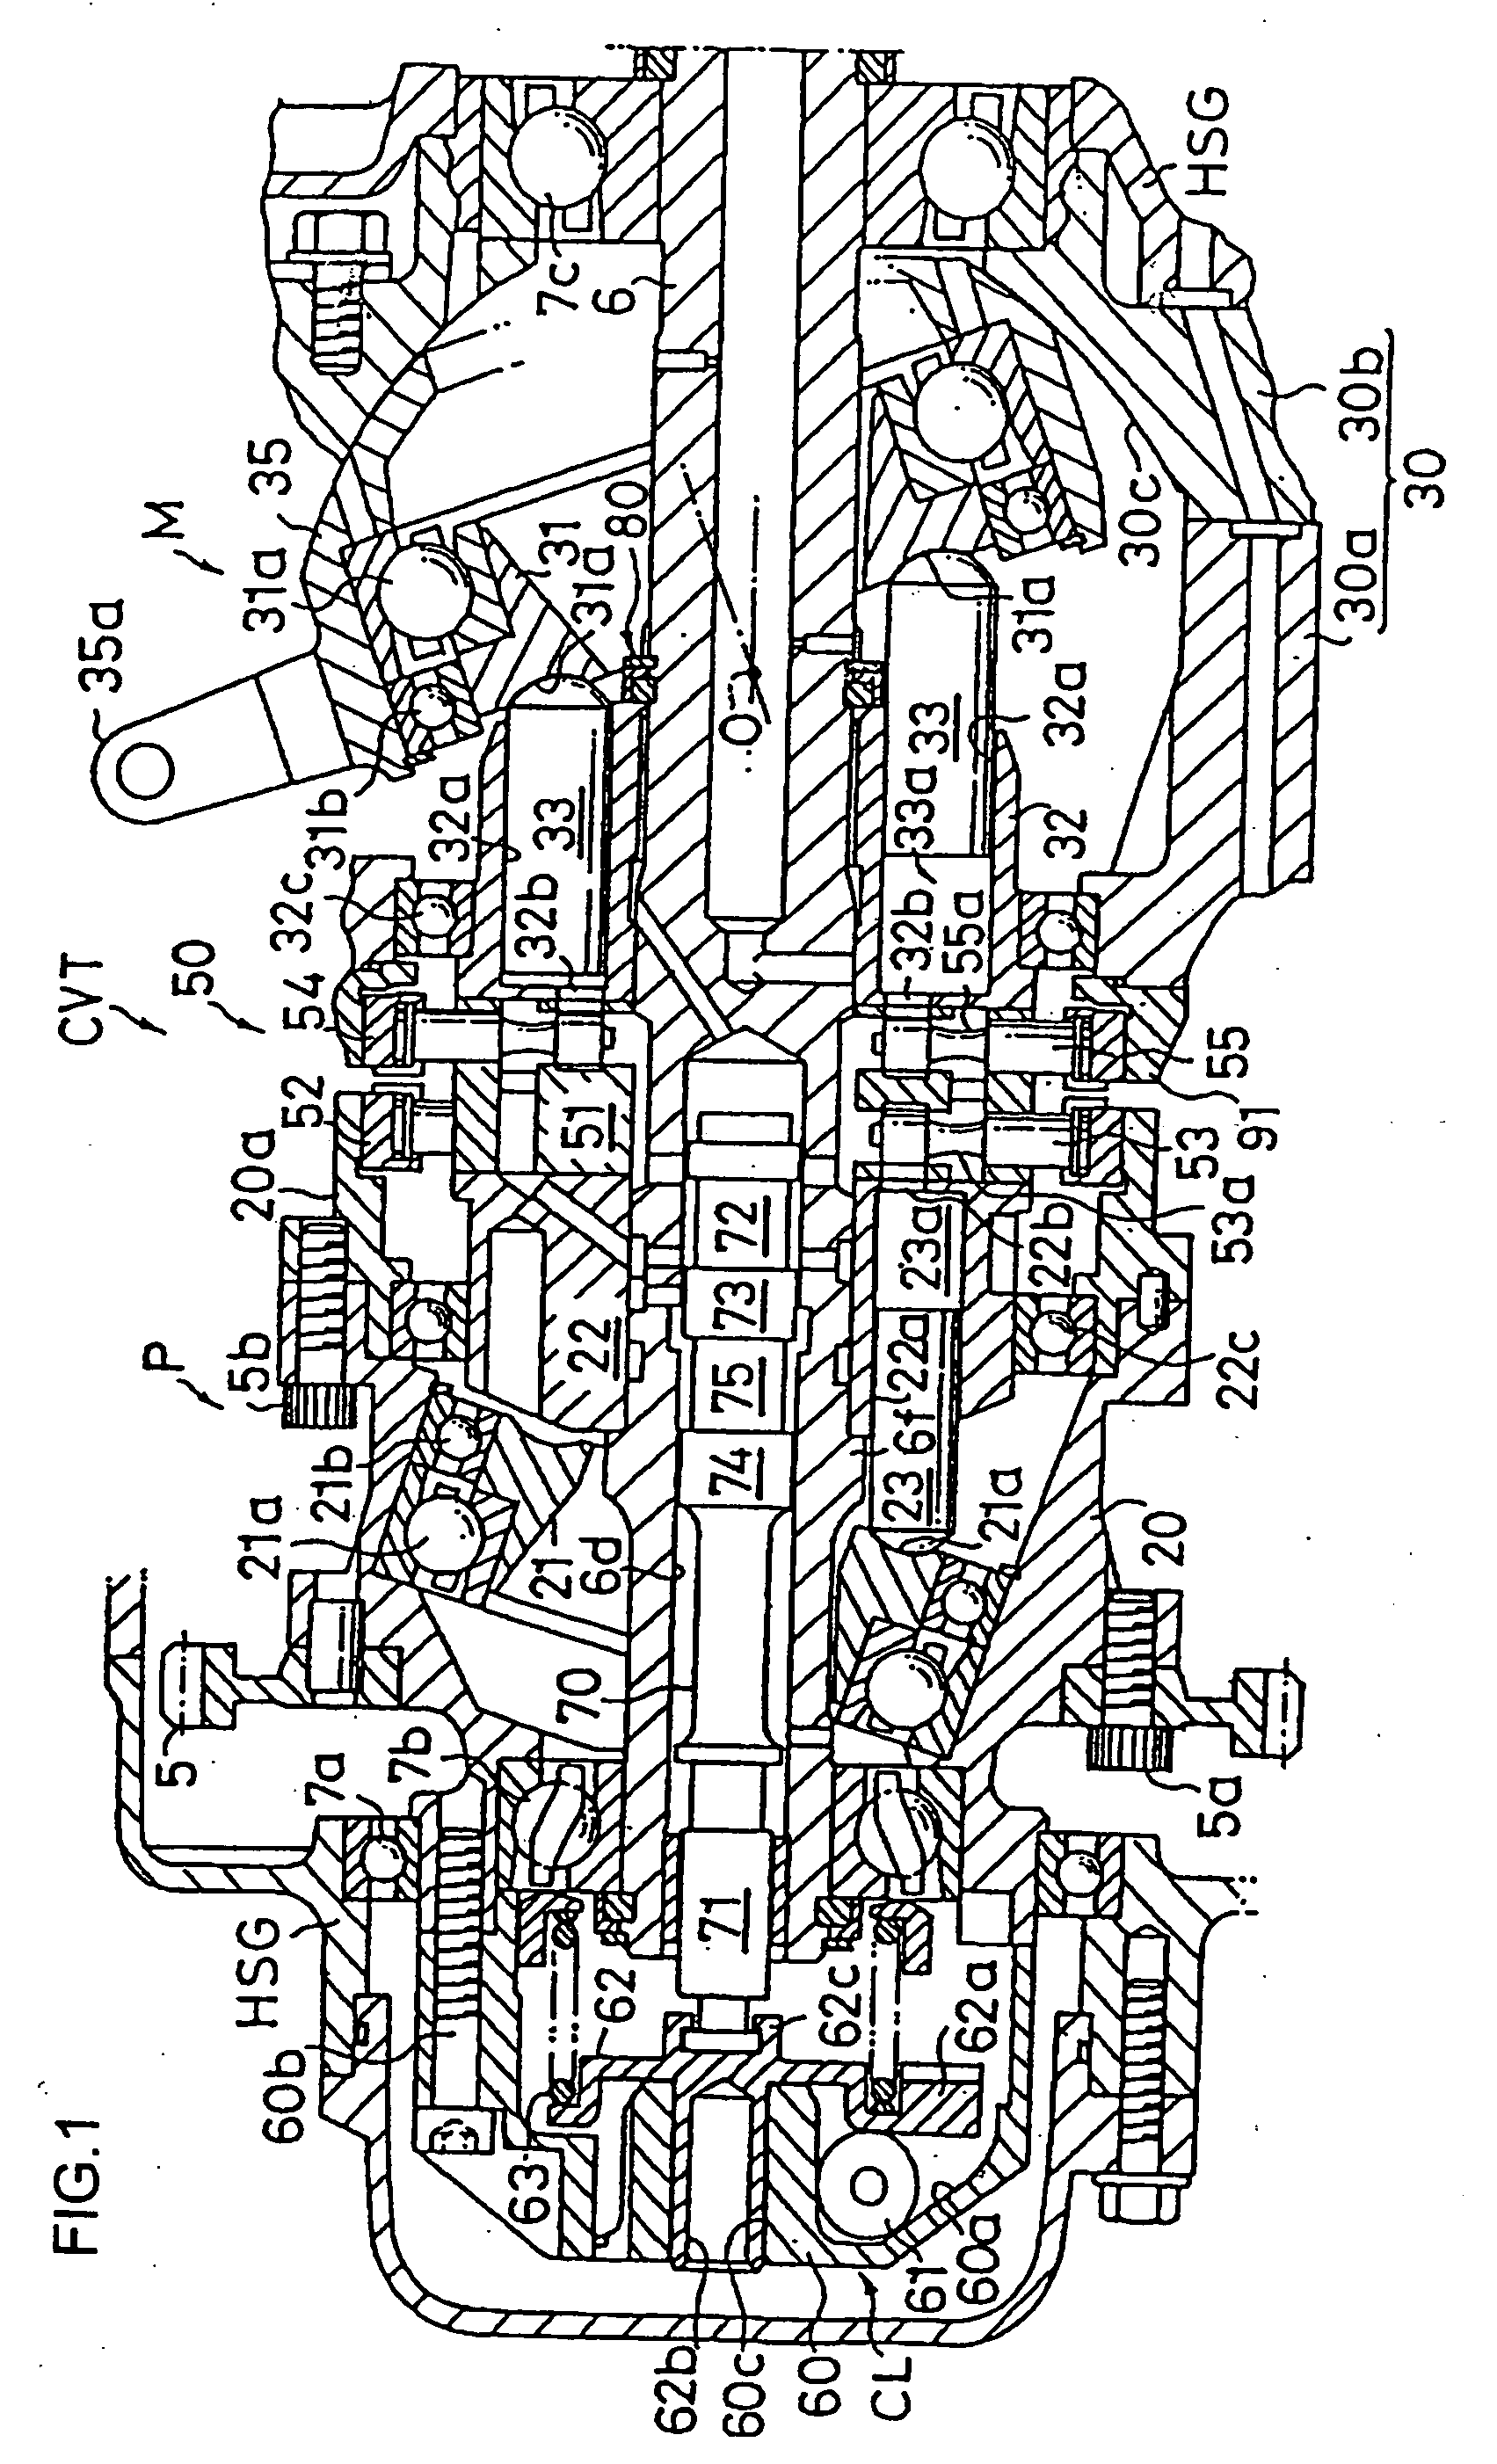 Clutch device for a hydrostatic continously variable transmission